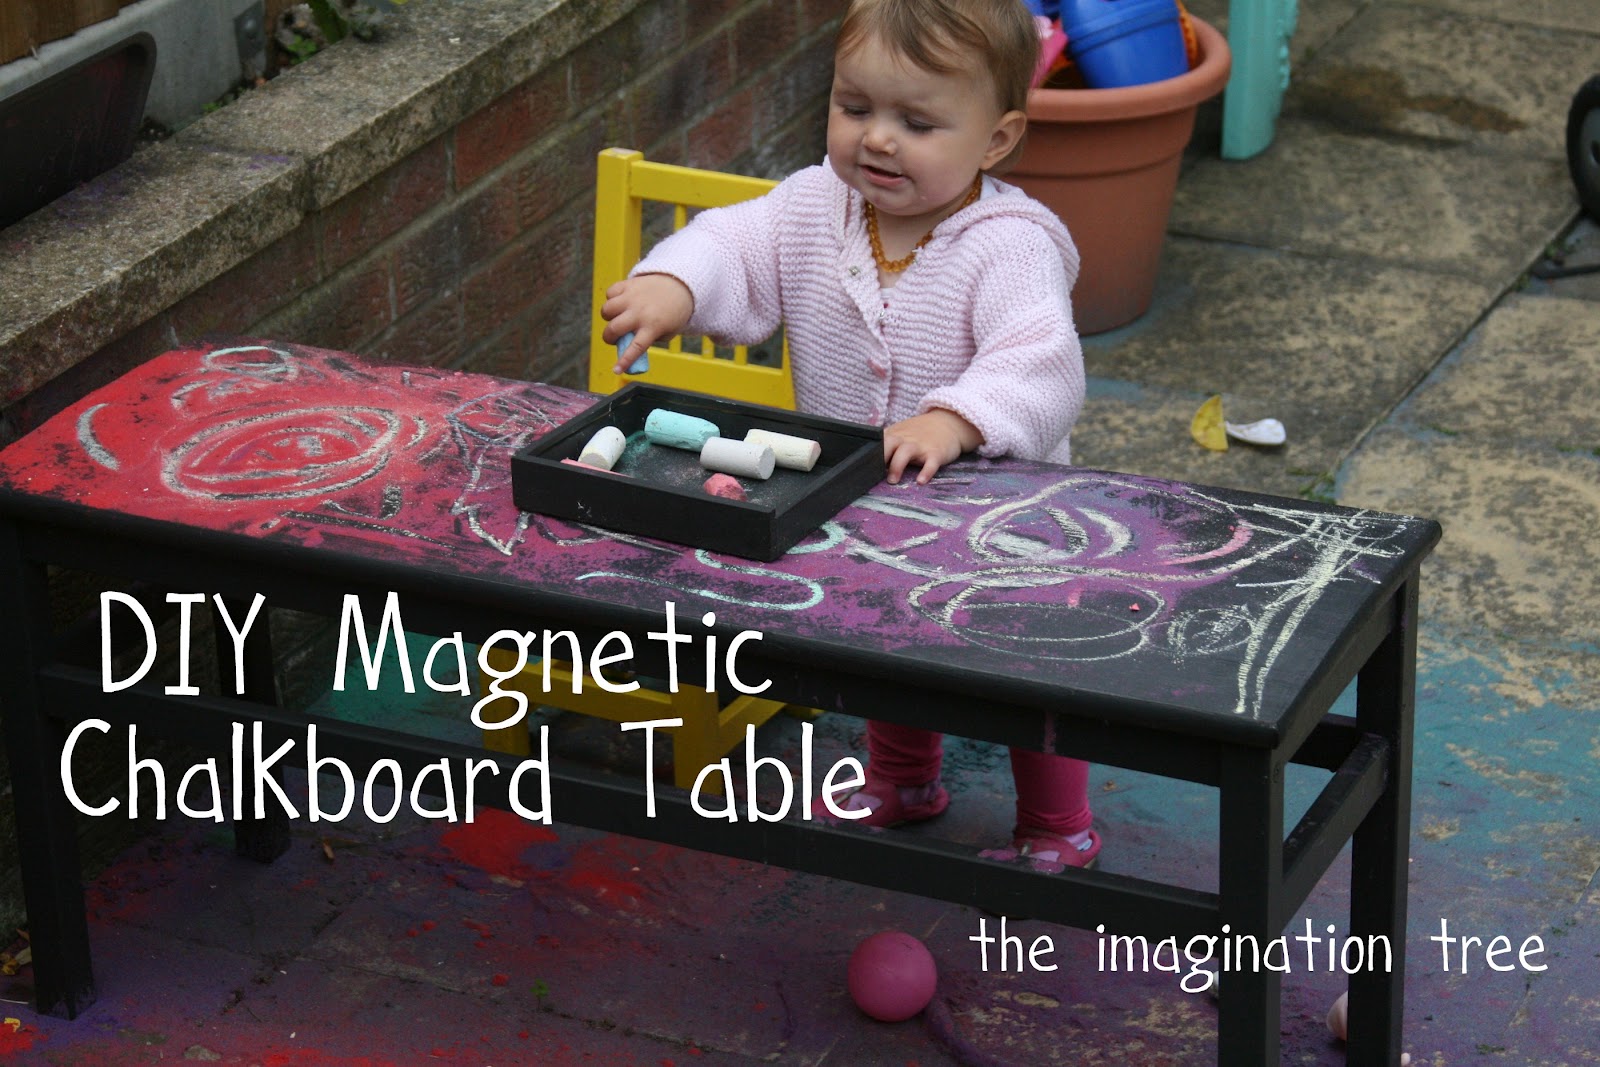 DIY: Magnetic Chalkboard Table - The Imagination Tree